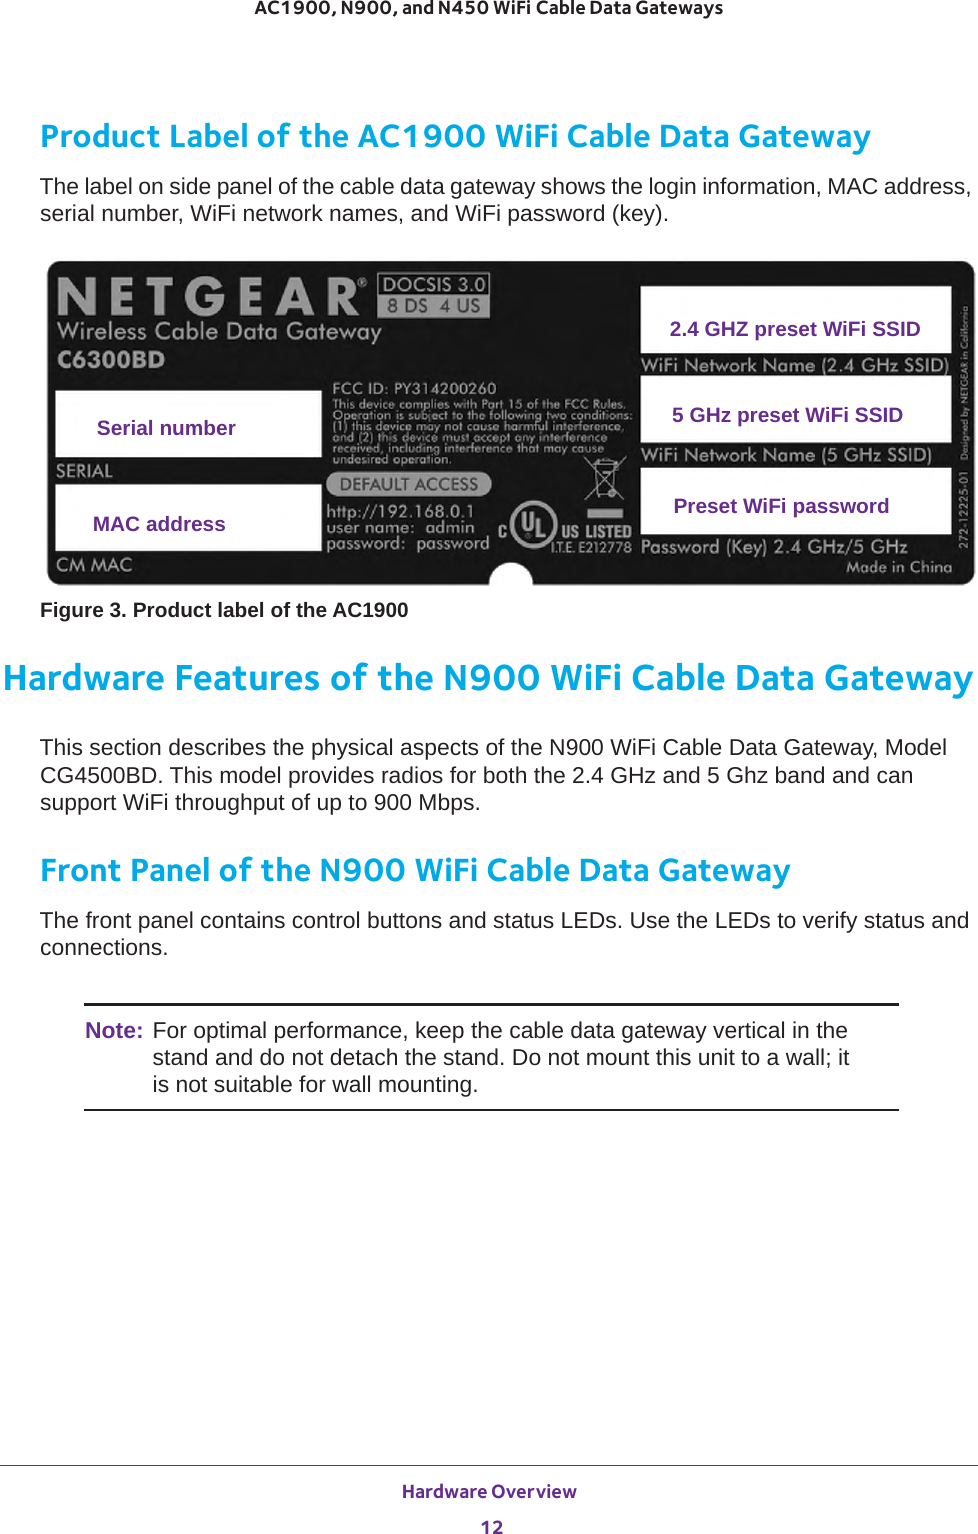 Hardware Overview 12AC1900, N900, and N450 WiFi Cable Data Gateways Product Label of the AC1900 WiFi Cable Data GatewayThe label on side panel of the cable data gateway shows the login information, MAC address, serial number, WiFi network names, and WiFi password (key).MAC addressSerial numberPreset WiFi password2.4 GHZ preset WiFi SSID5 GHz preset WiFi SSIDFigure 3. Product label of the AC1900Hardware Features of the N900 WiFi Cable Data GatewayThis section describes the physical aspects of the N900 WiFi Cable Data Gateway, Model CG4500BD. This model provides radios for both the 2.4 GHz and 5 Ghz band and can support WiFi throughput of up to 900 Mbps.Front Panel of the N900 WiFi Cable Data GatewayThe front panel contains control buttons and status LEDs. Use the LEDs to verify status and connections. Note: For optimal performance, keep the cable data gateway vertical in the stand and do not detach the stand. Do not mount this unit to a wall; it is not suitable for wall mounting.